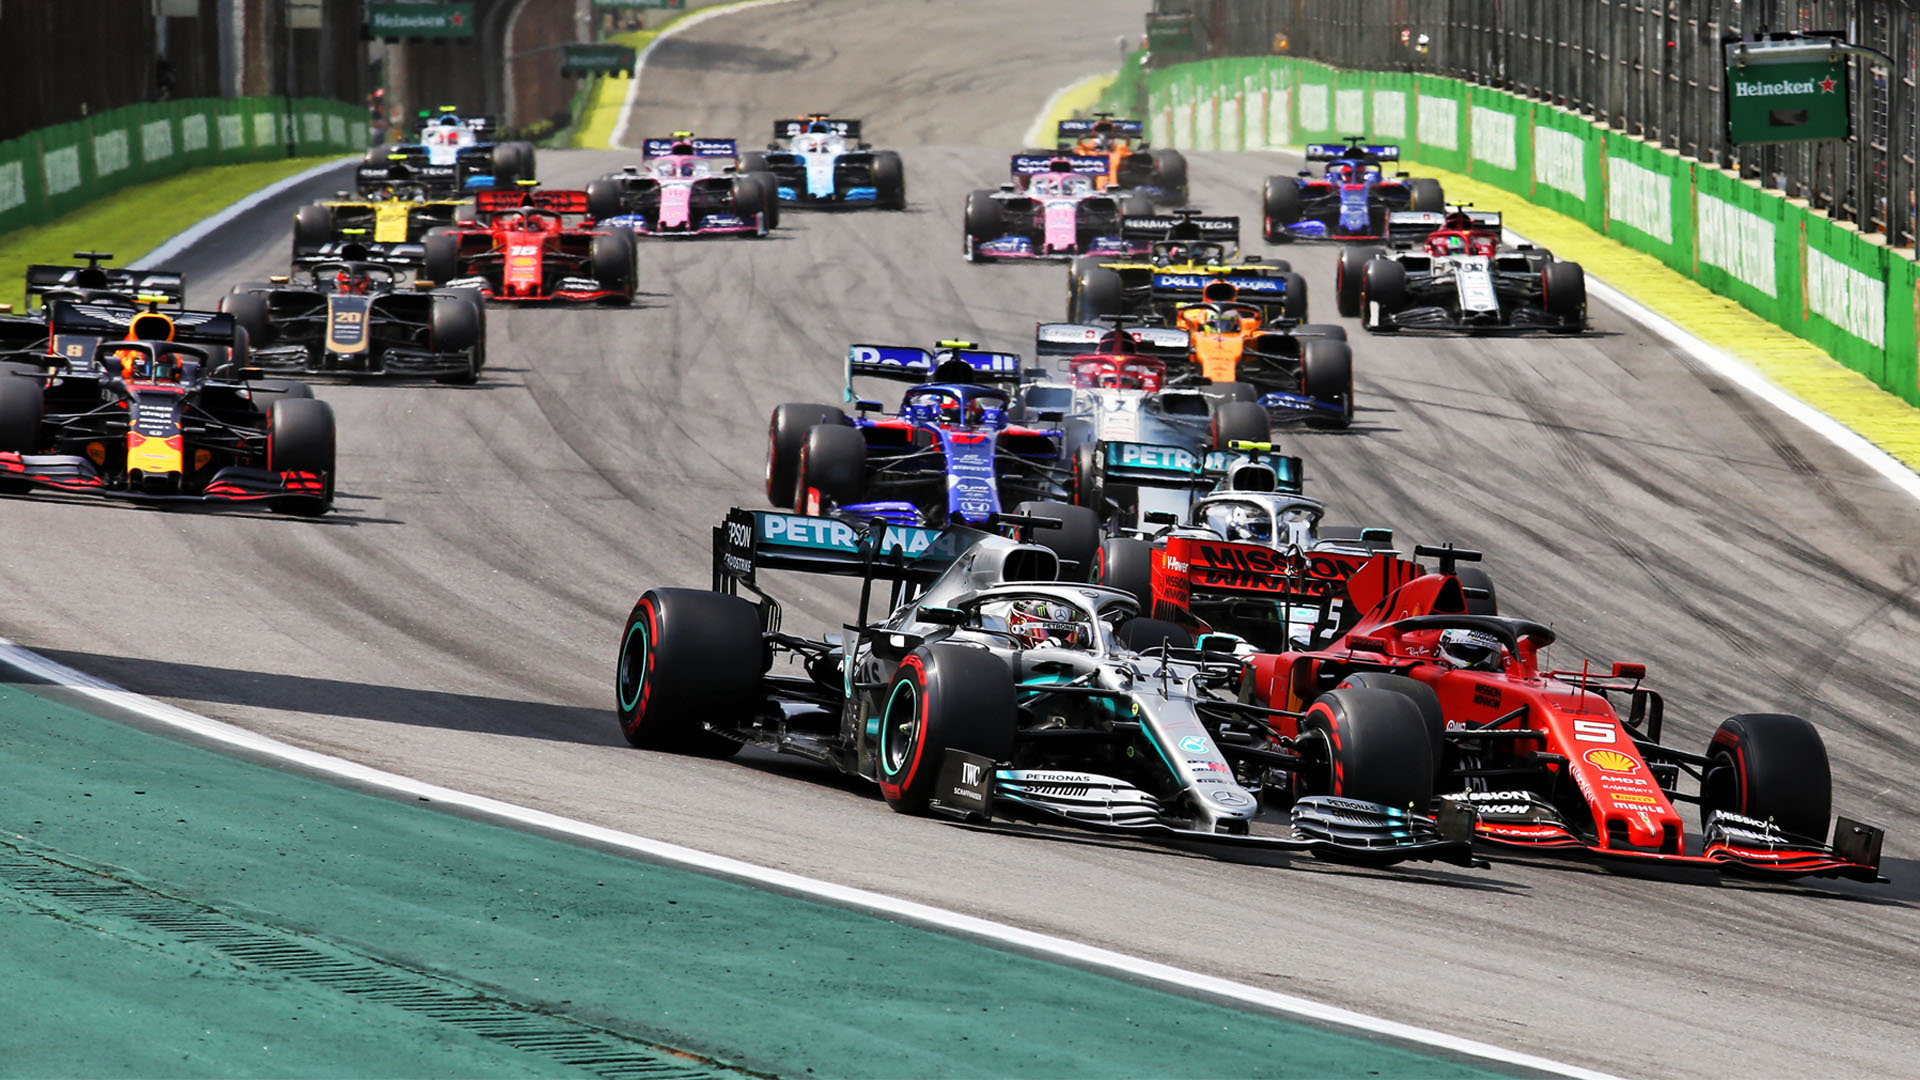 The excitement in the Formula 1 World Championship will continue with the 21st race of the season in Brazil.